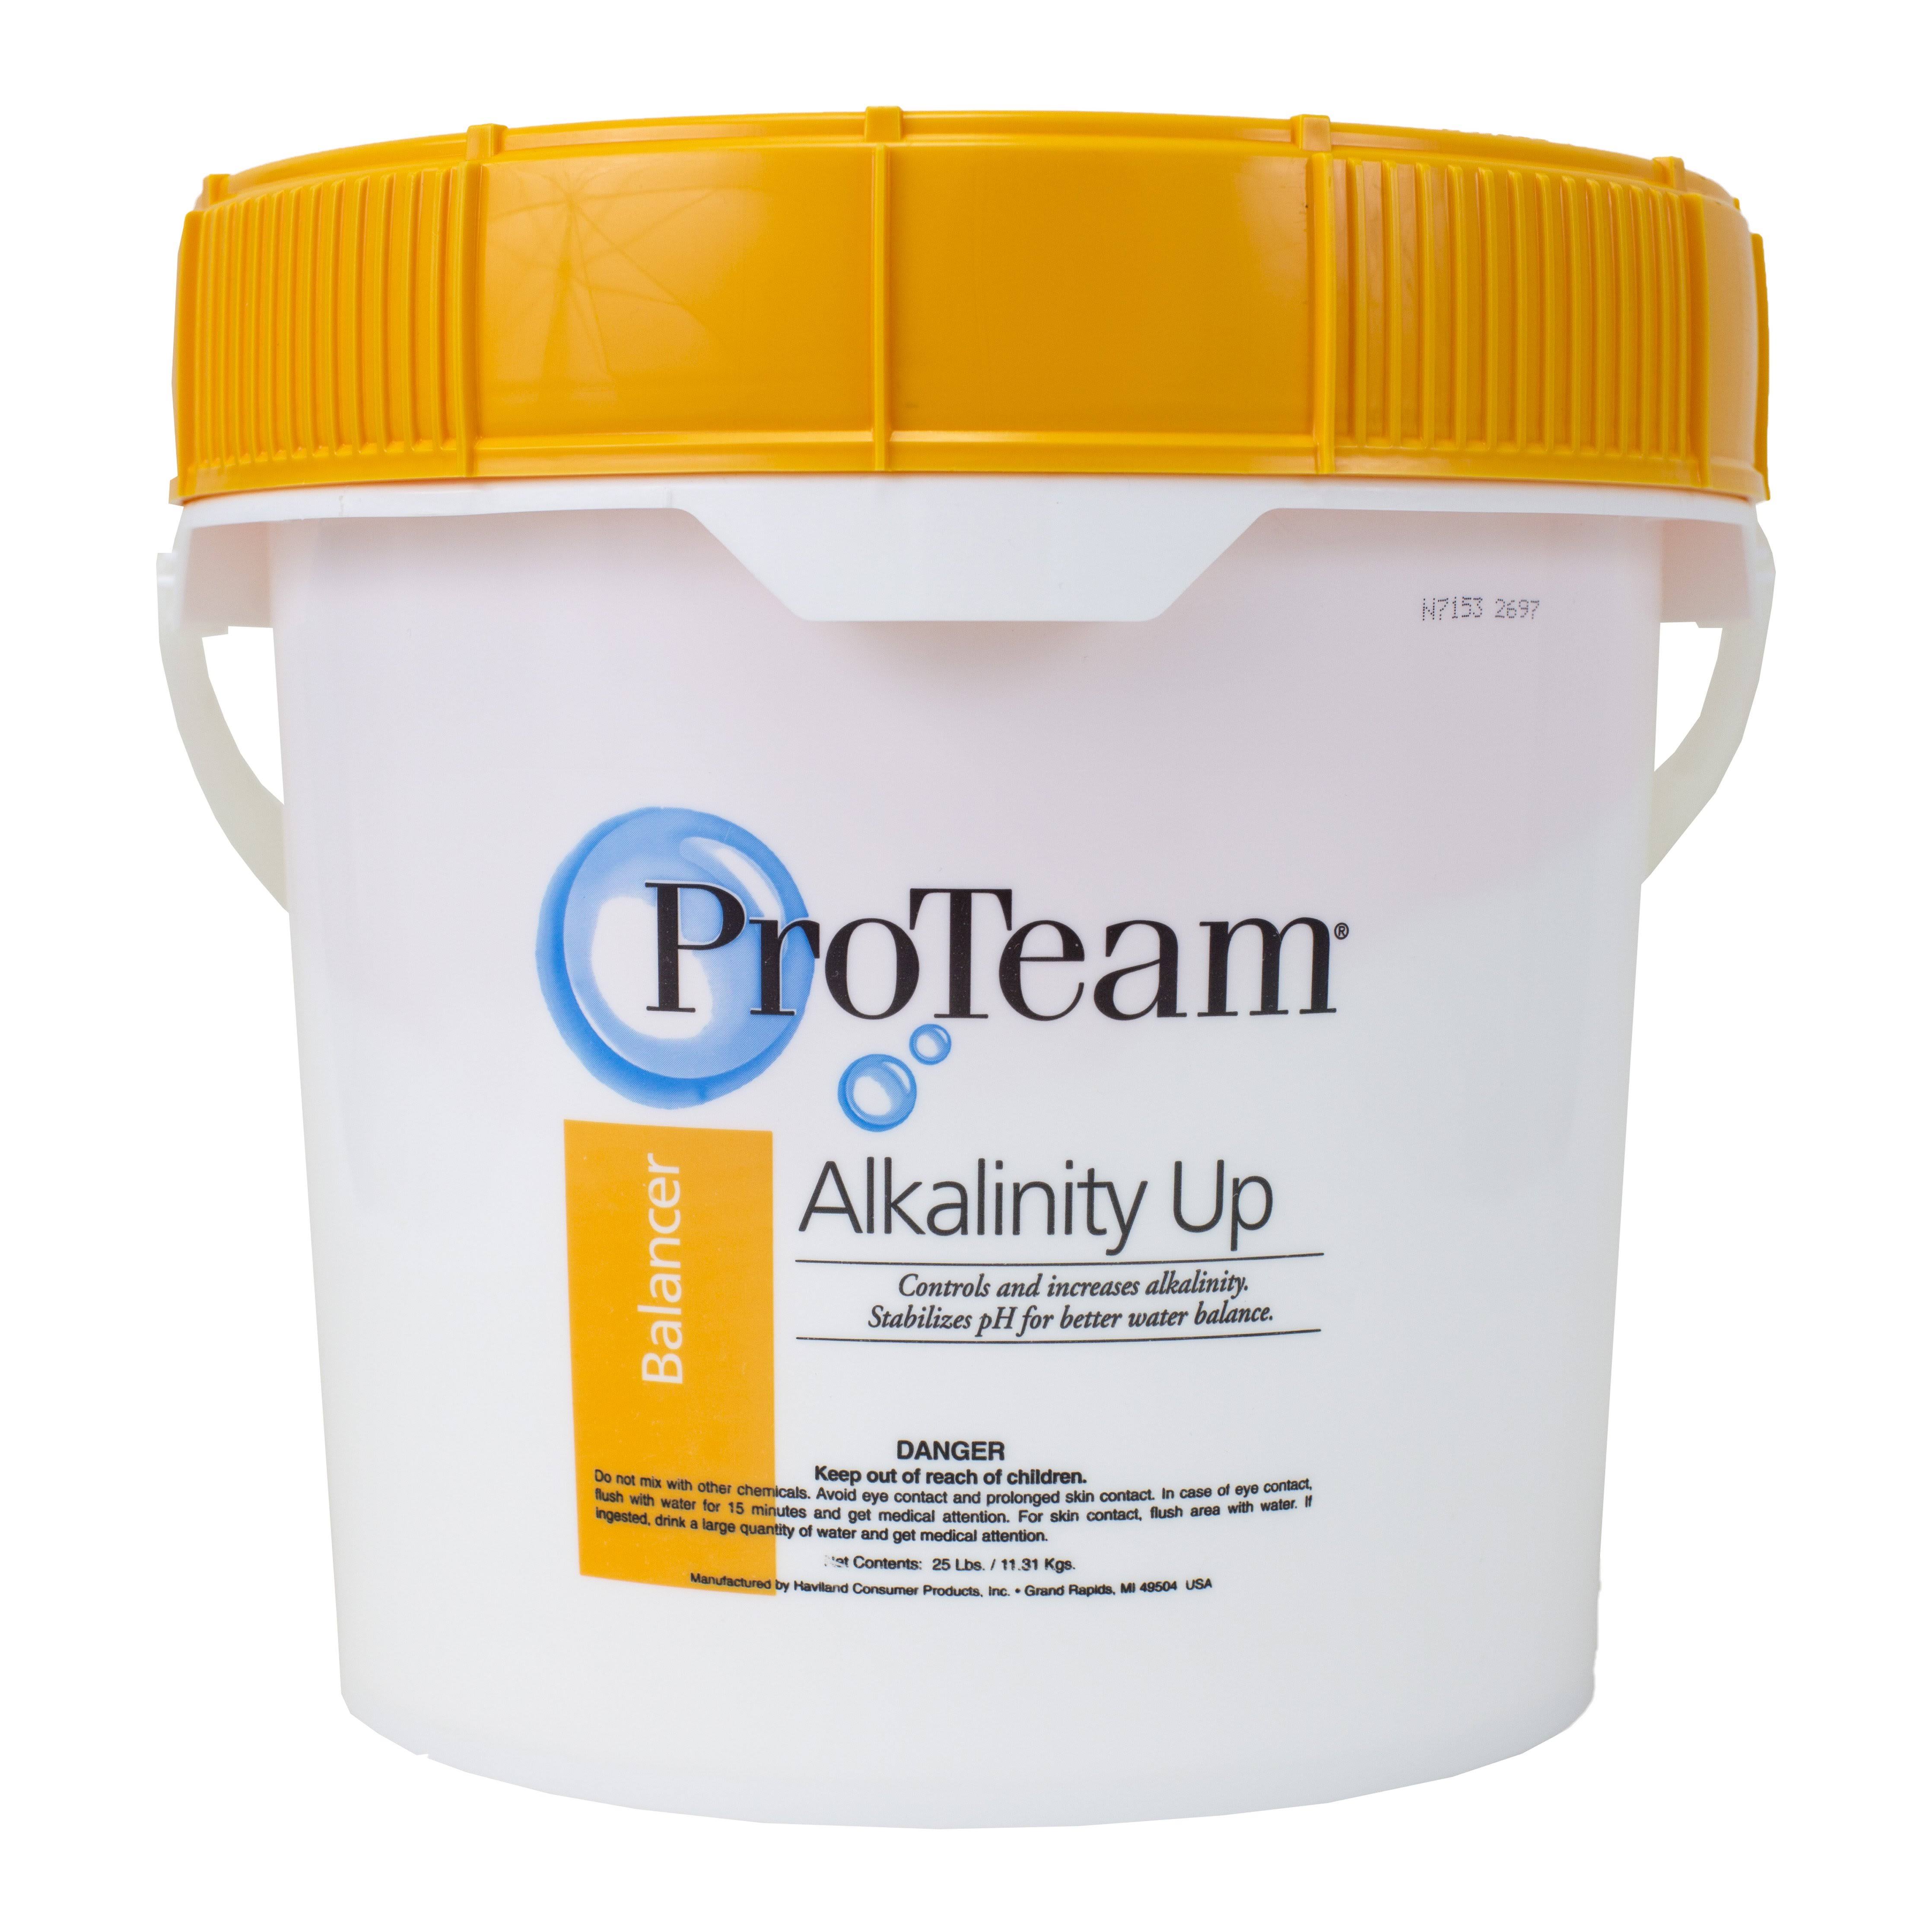 ProTeam C002697-PL25 7342568 25#Alkalinity Up